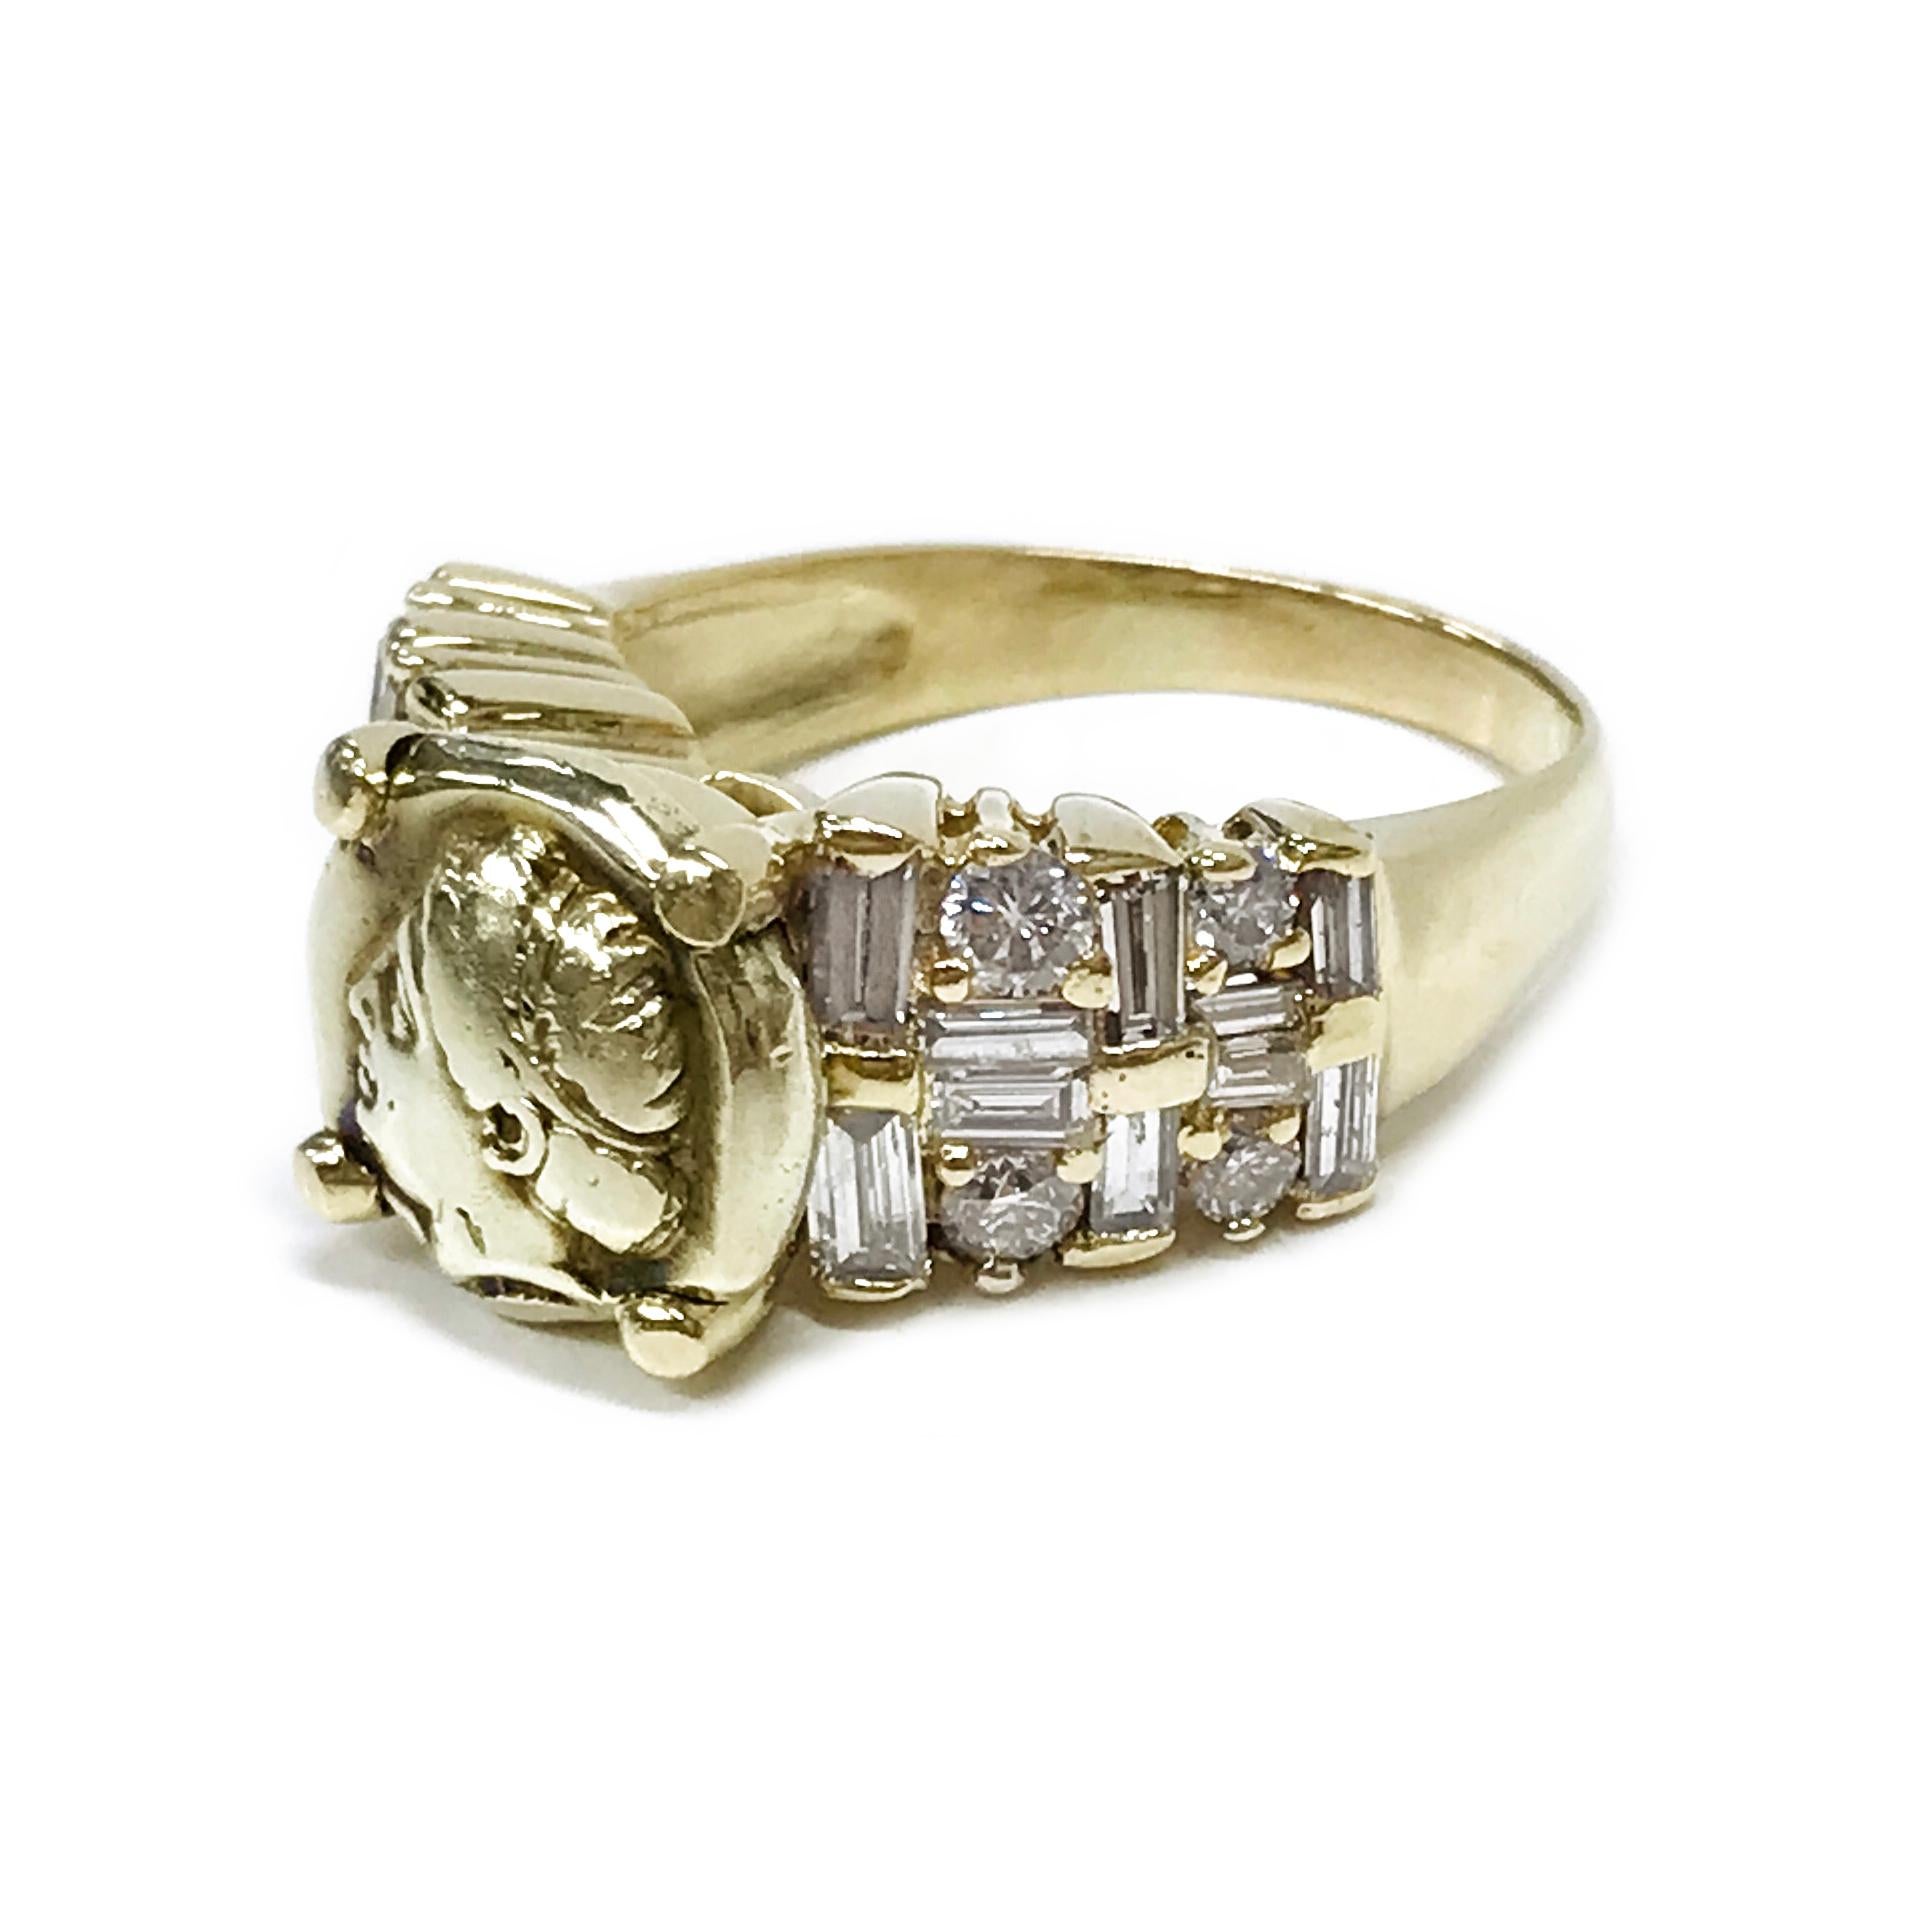 14 Karat Demeter Diamond Coin Ring. The unique ring features Demeter coin four prong-set on a raised gallery with both baguette and round diamonds. The coin has quite a bit of wear at its highest point, Demeter's hair and ear exhibiting the most